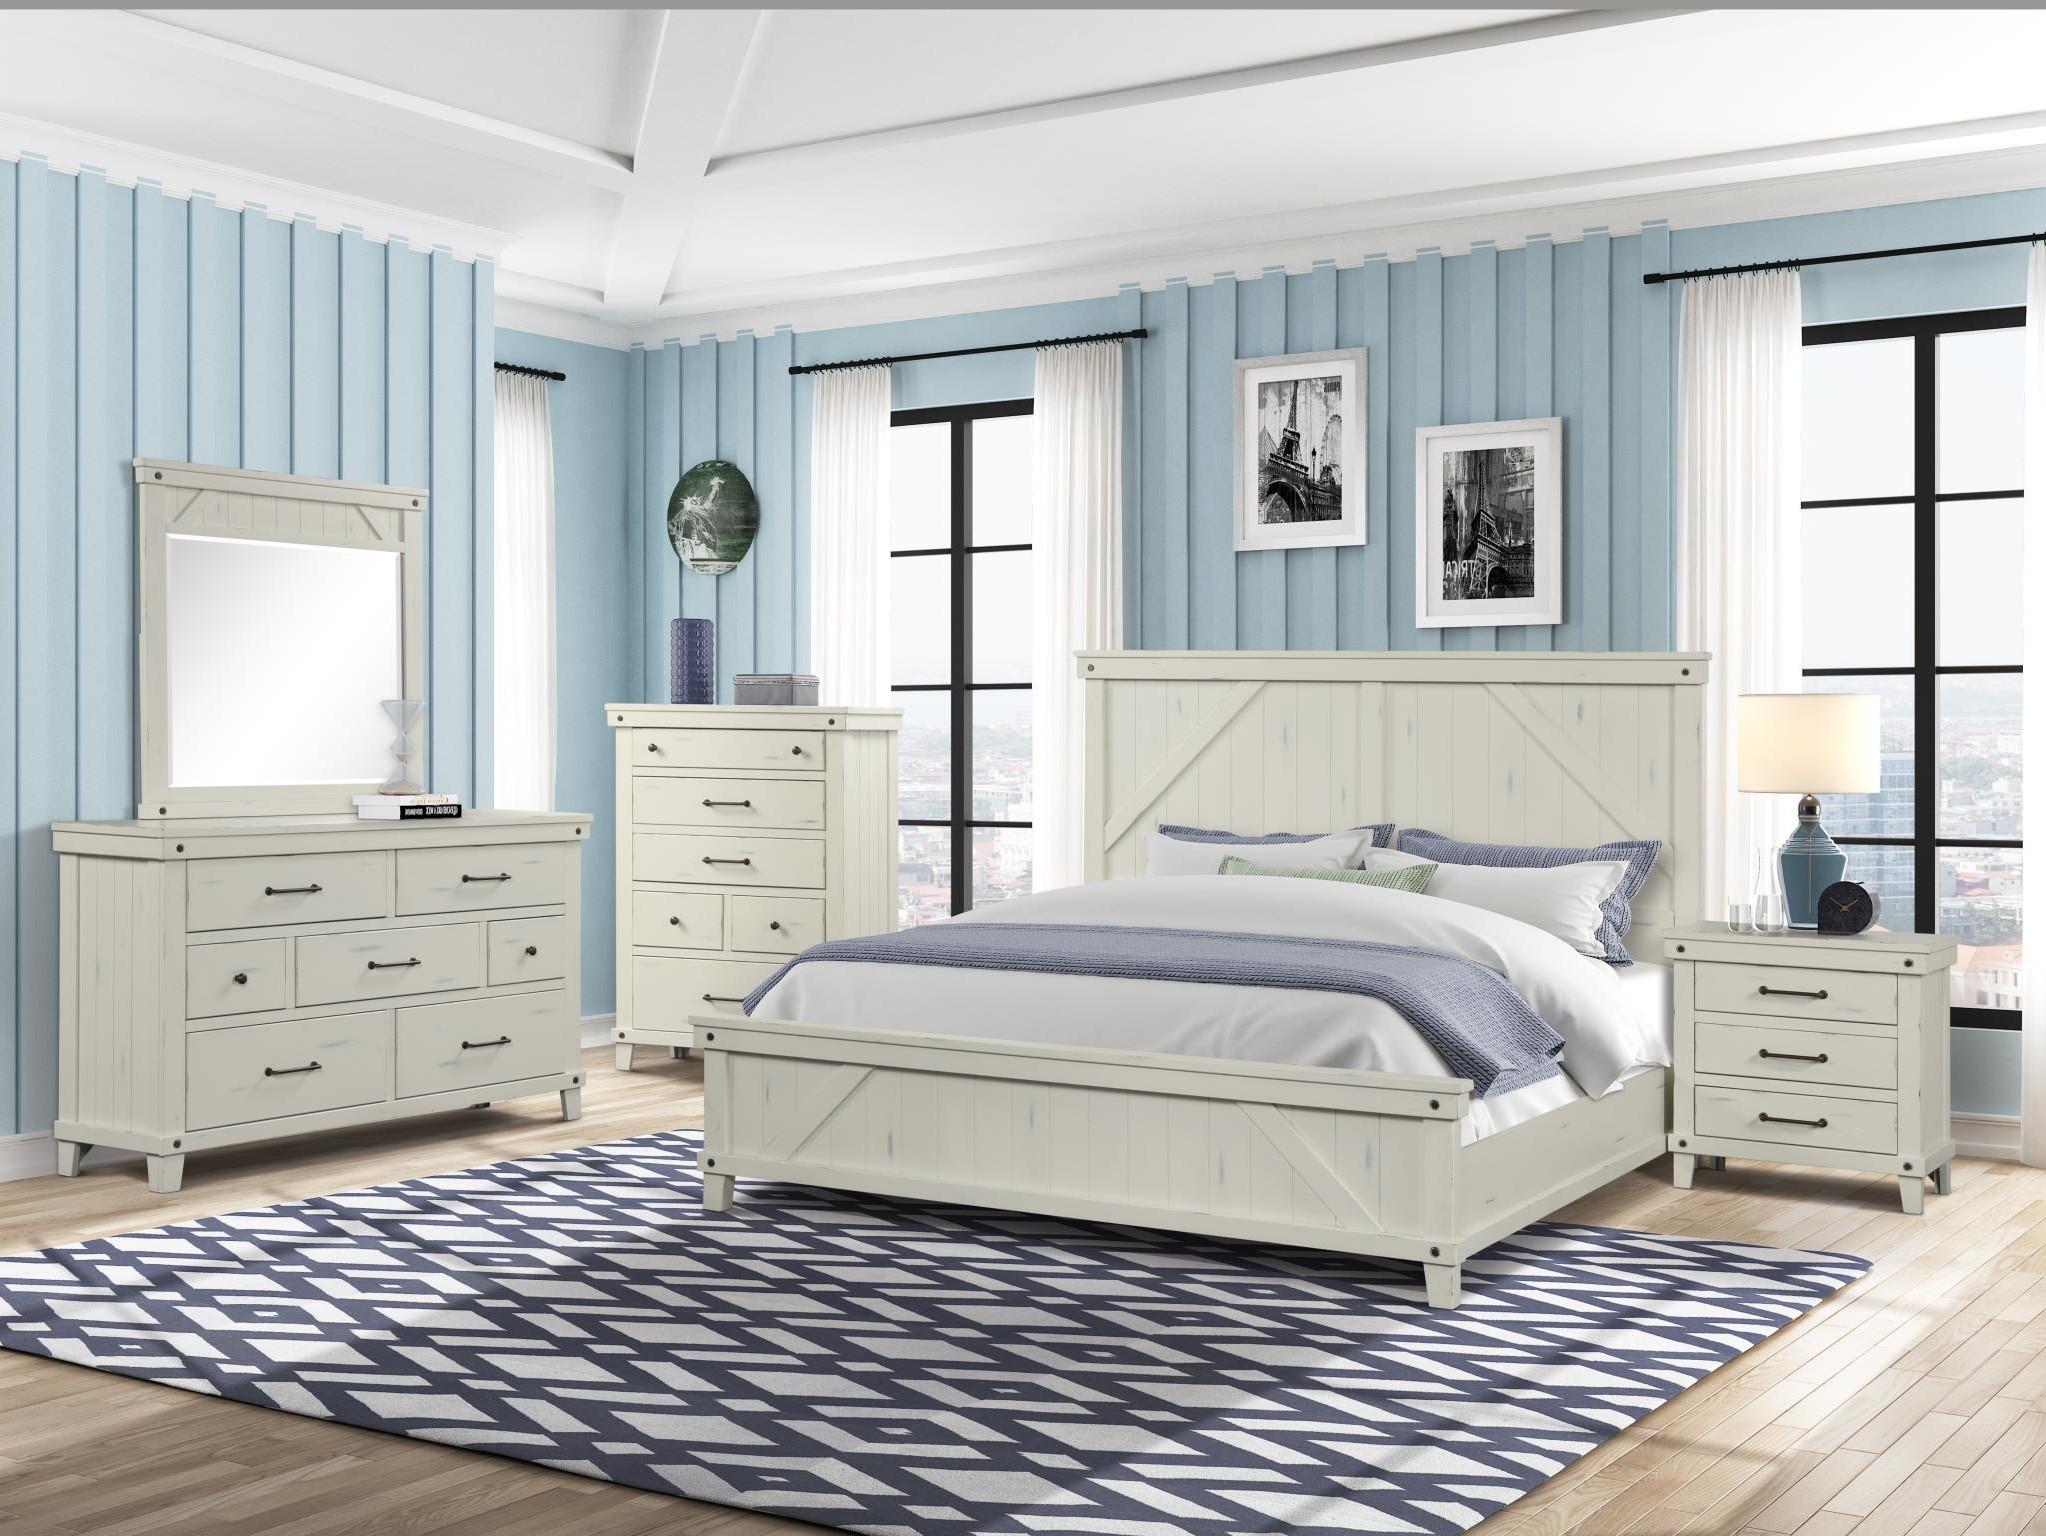 Classic, Transitional Bedroom Set Spruce Creek 1709-105-6pcs in White 